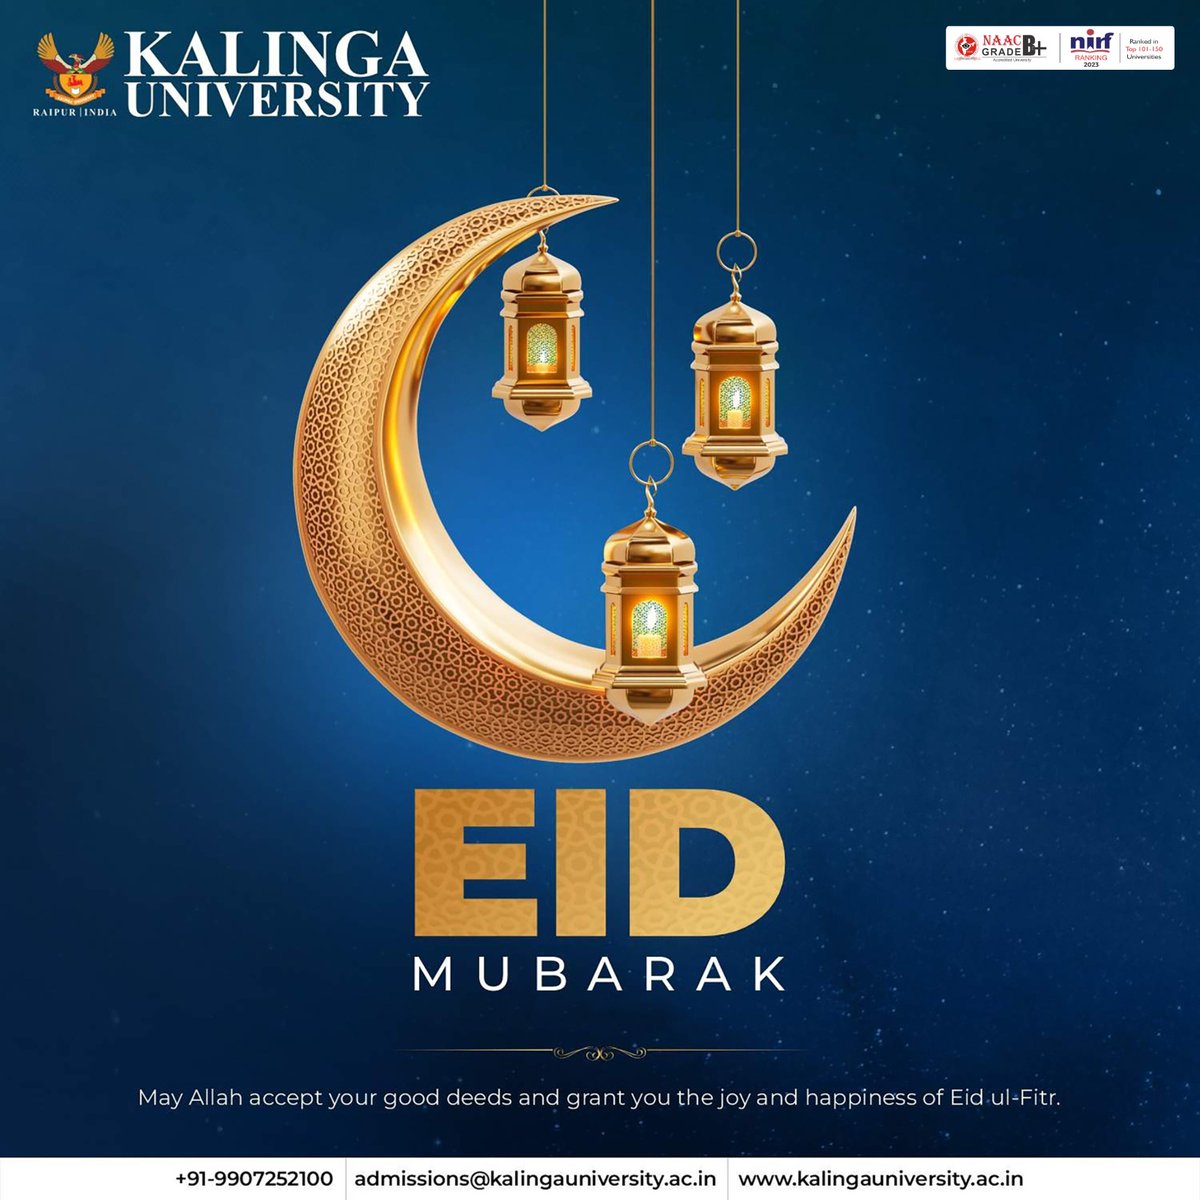 May the divine blessings of Allah bring peace & harmony to your hearts and homes & open all doors of success now and always. Let's cherish the moments of togetherness, share the warmth of love and spread happiness to all around us. Kalinga University wishes you all #EidMubarak.